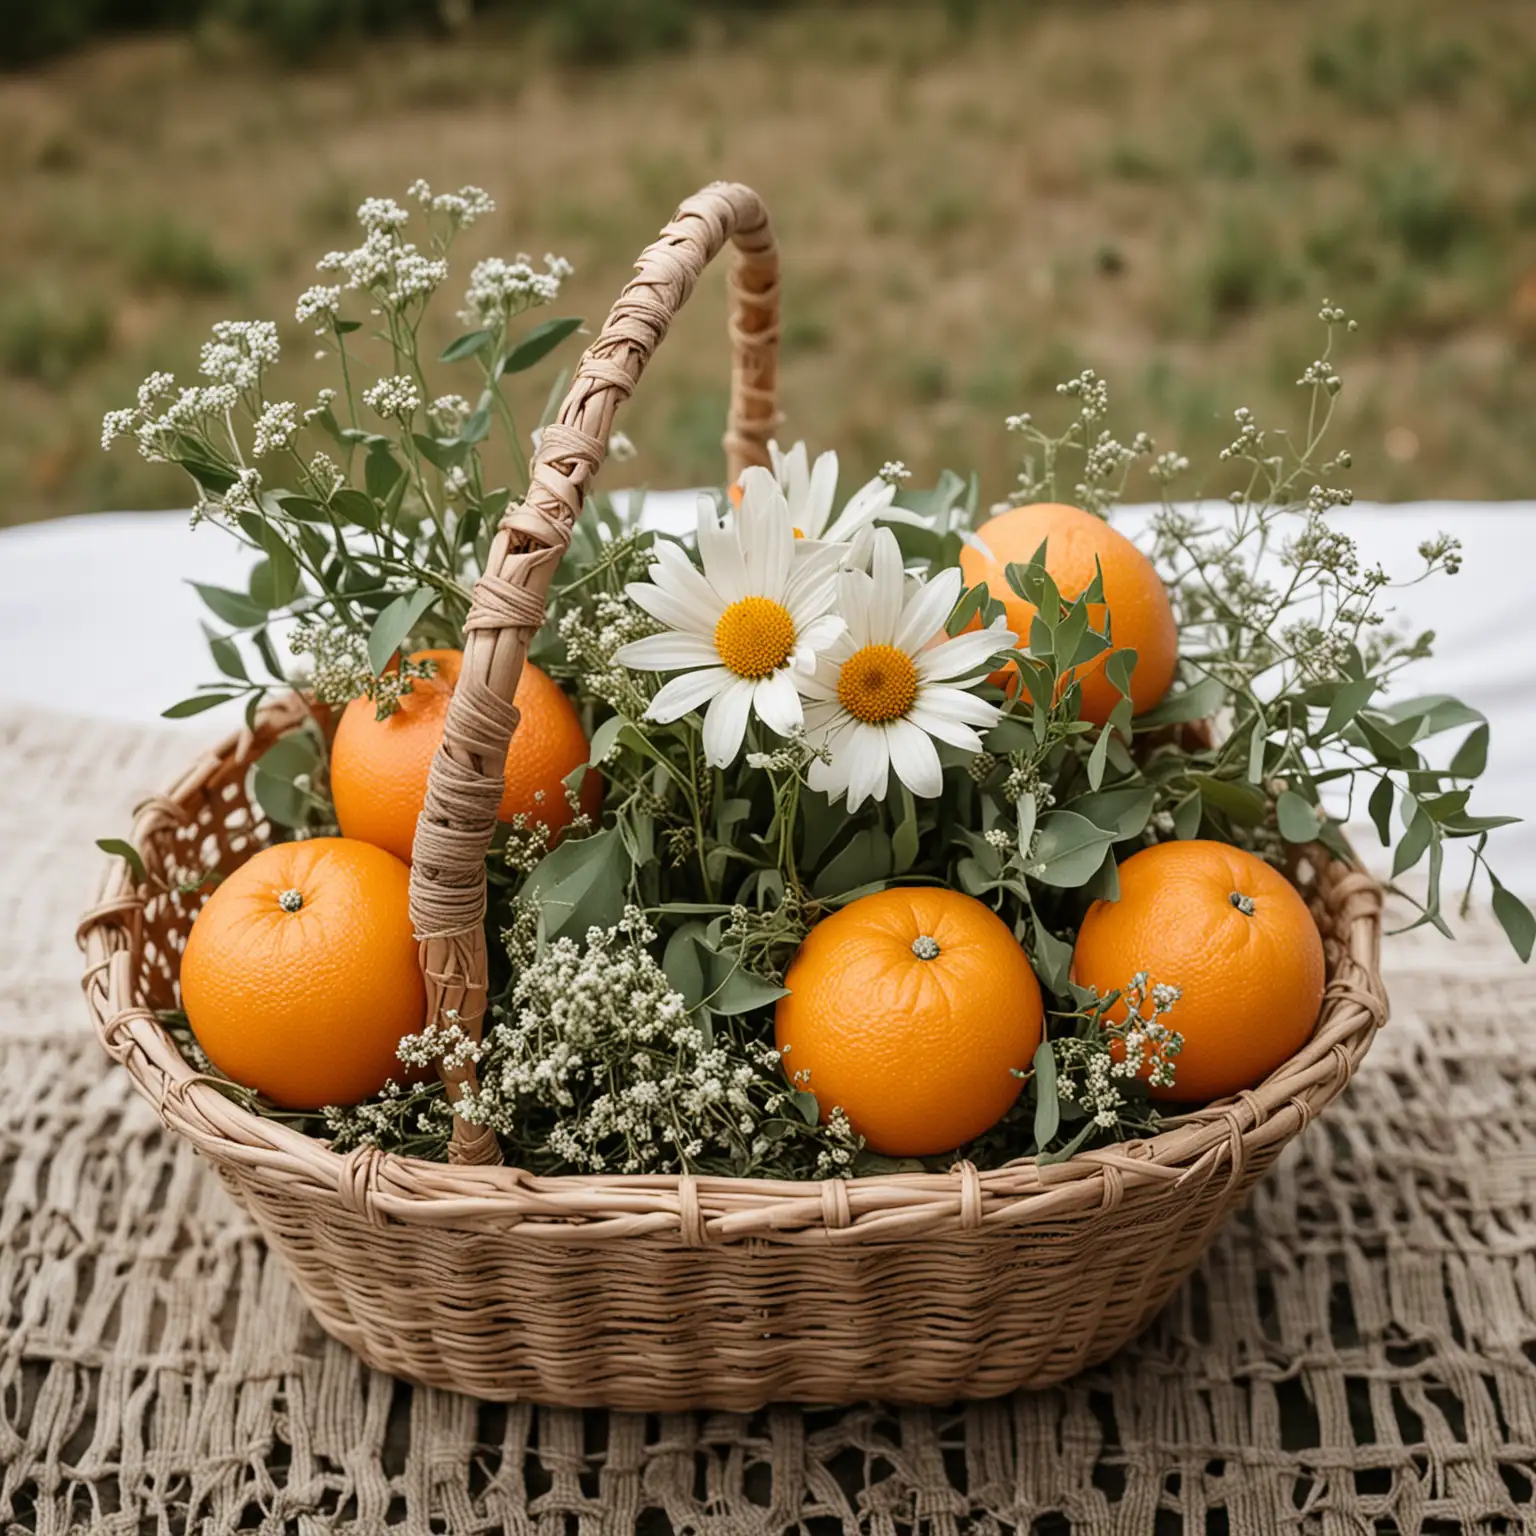 simple and small boho wedding centerpiece with wildflowers and oranges in a boho basket; nothing else in photo; keep the background neutral